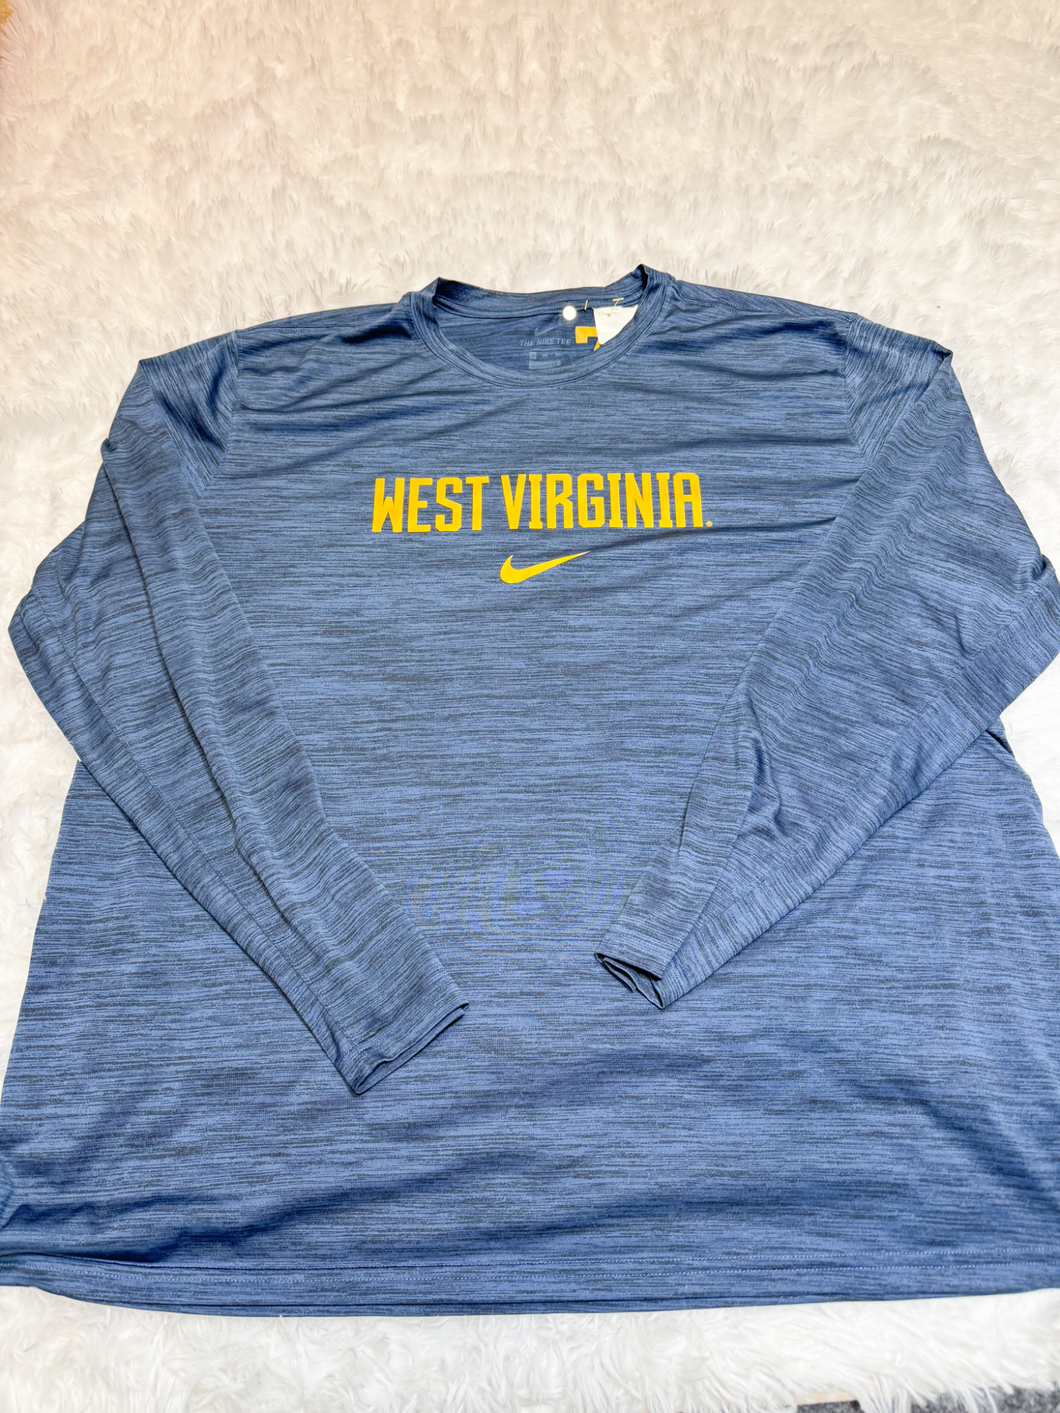 WVU Nike Athletic Top Size 3XL M0676